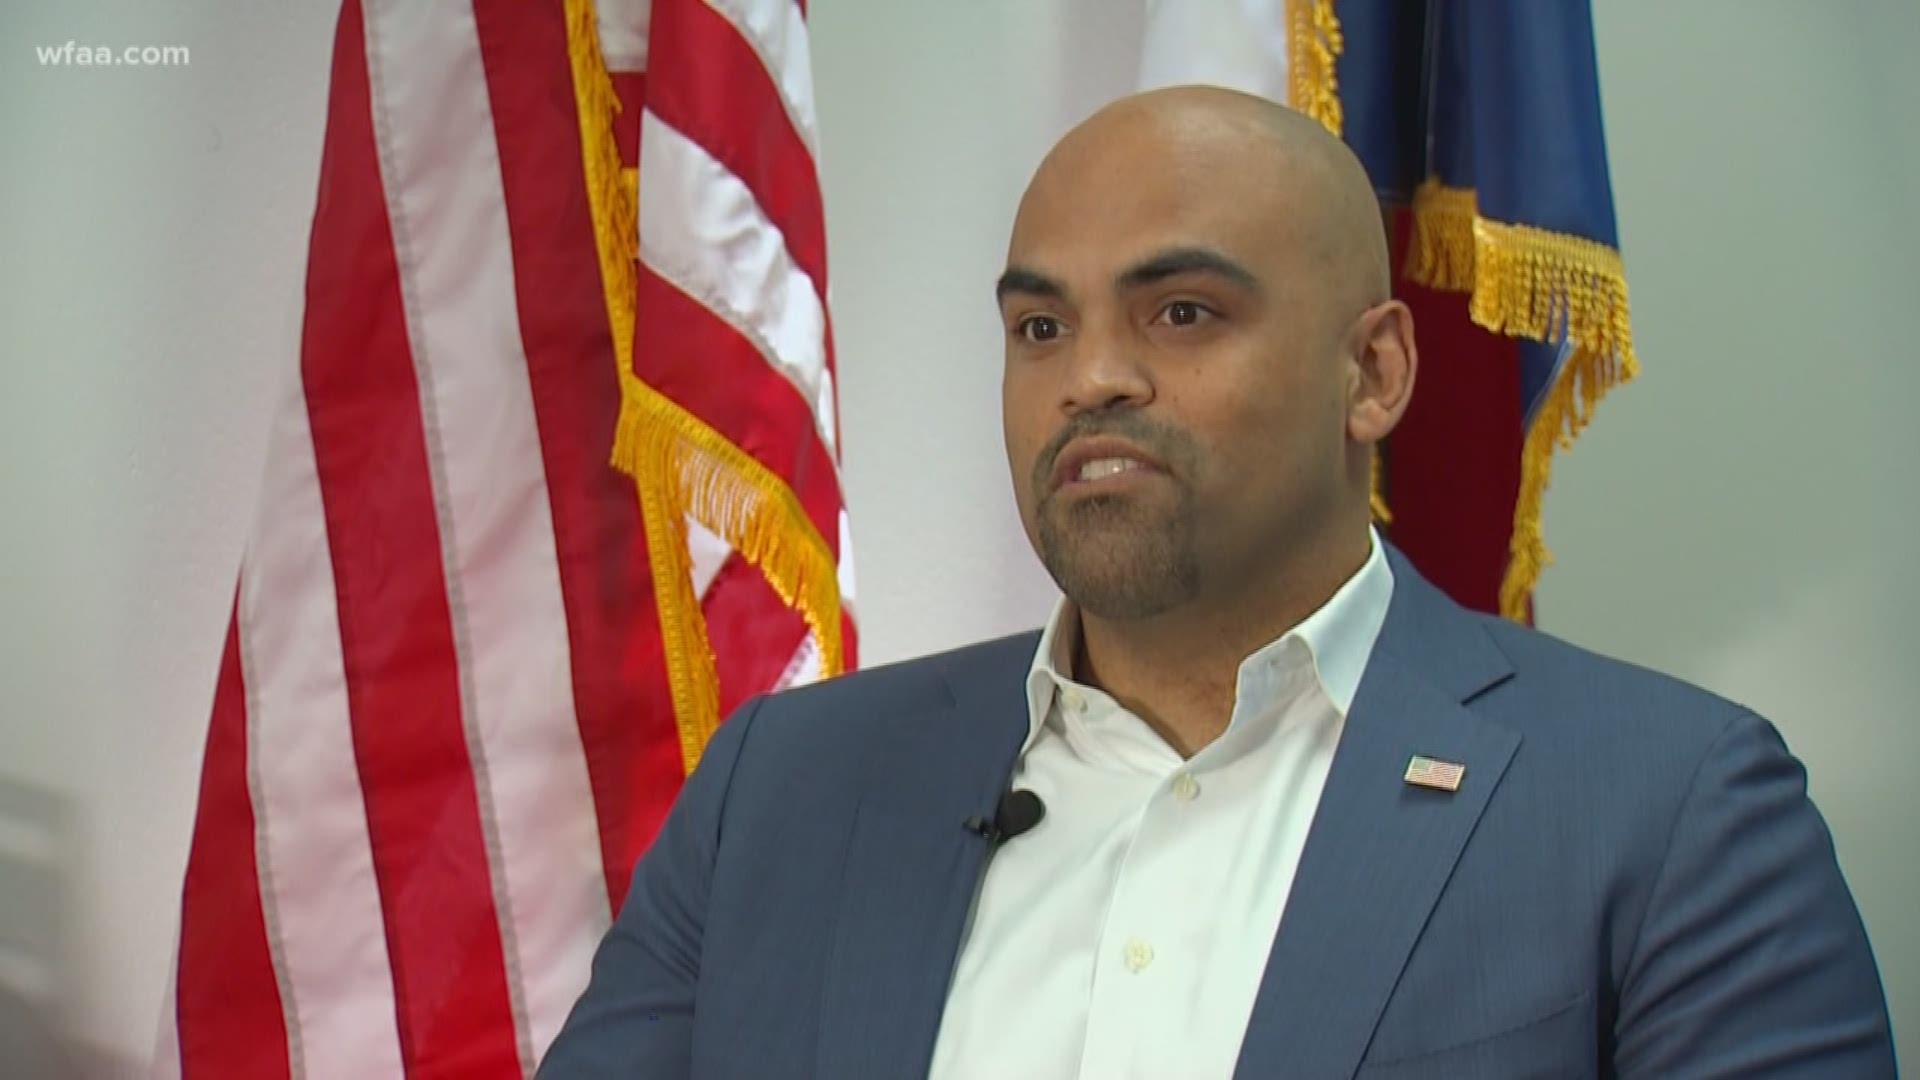 U.S. representatives Colin Allred and Anthony Gonzalez want to "focus on those points of agreement that we do have," including mental health treatment for veterans.